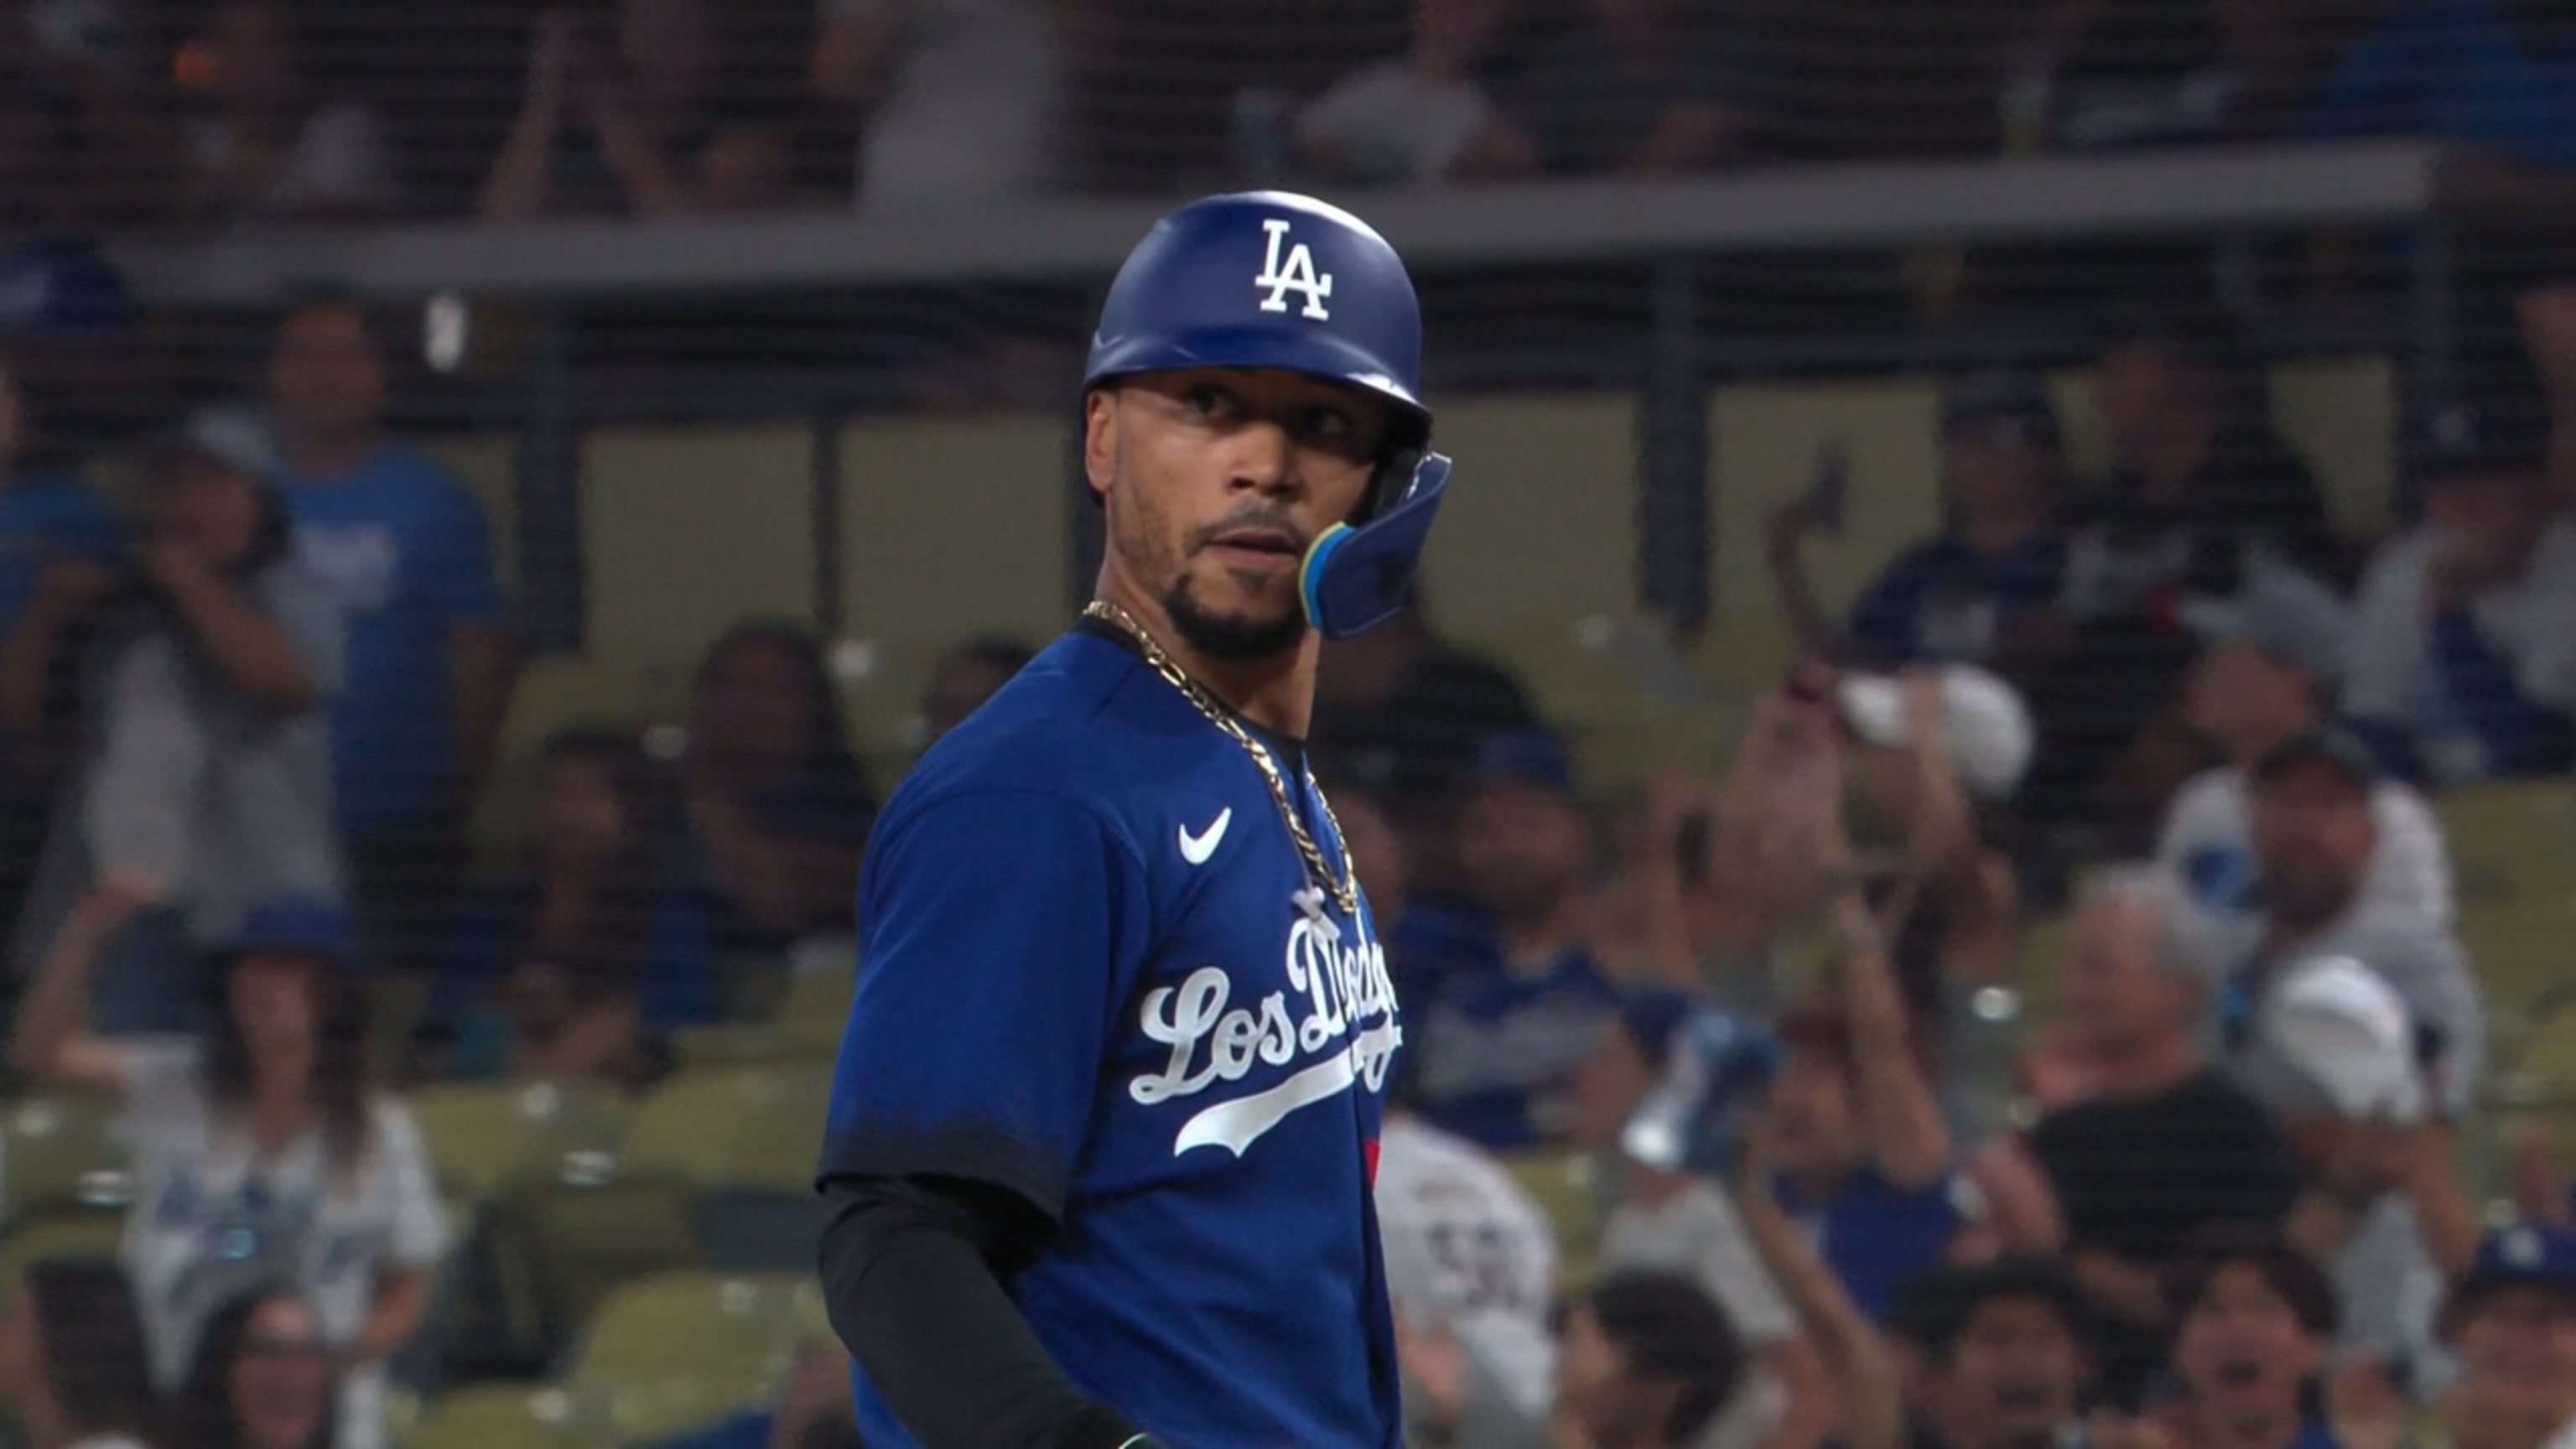 3-RUN WALK-OFF SHOT FOR DODGERS!! Will Smith launches CLUTCH comeback  shot!! 